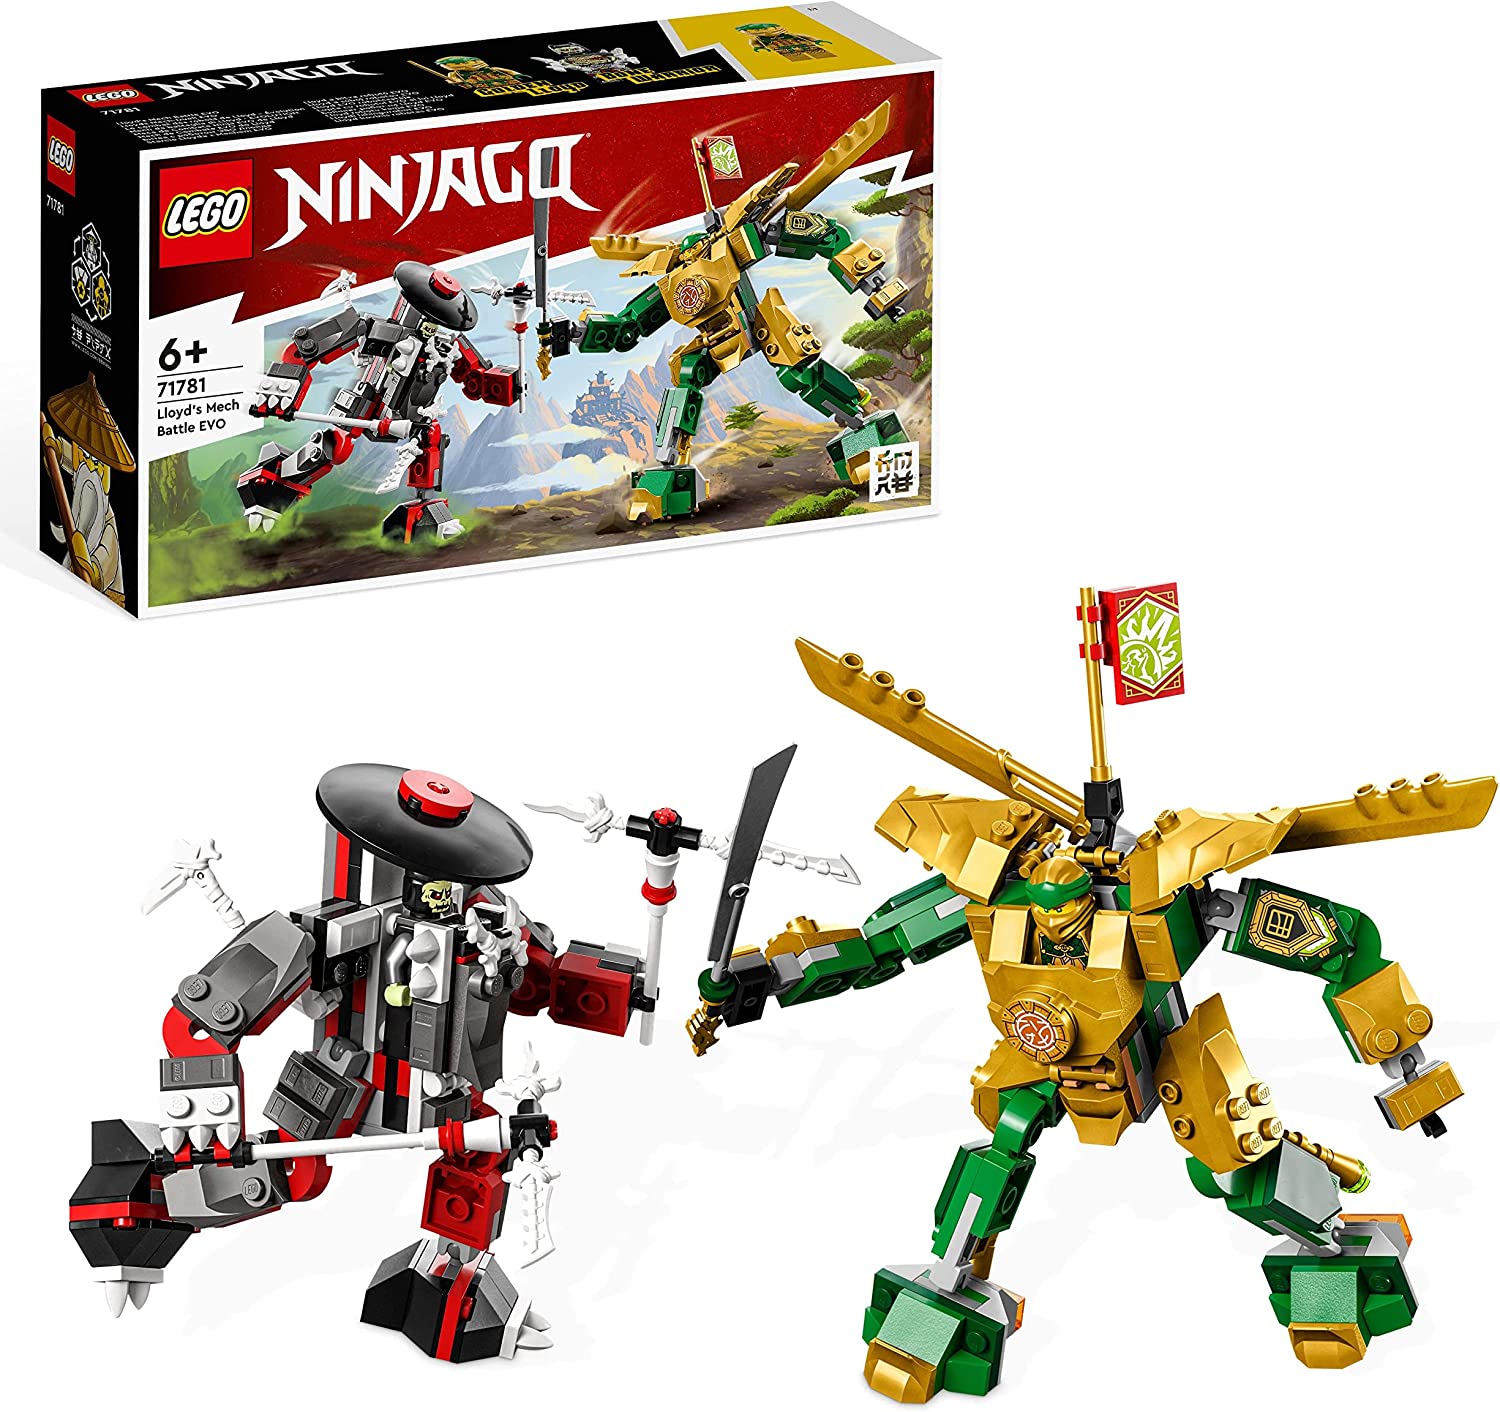 LEGO 71781 NINJAGO Lloyds Mech Duel EVO, 2 Action Figures Set with Upgradable Figure, Collectable Toy with the Golden Lloyd and Skeleton Warrior